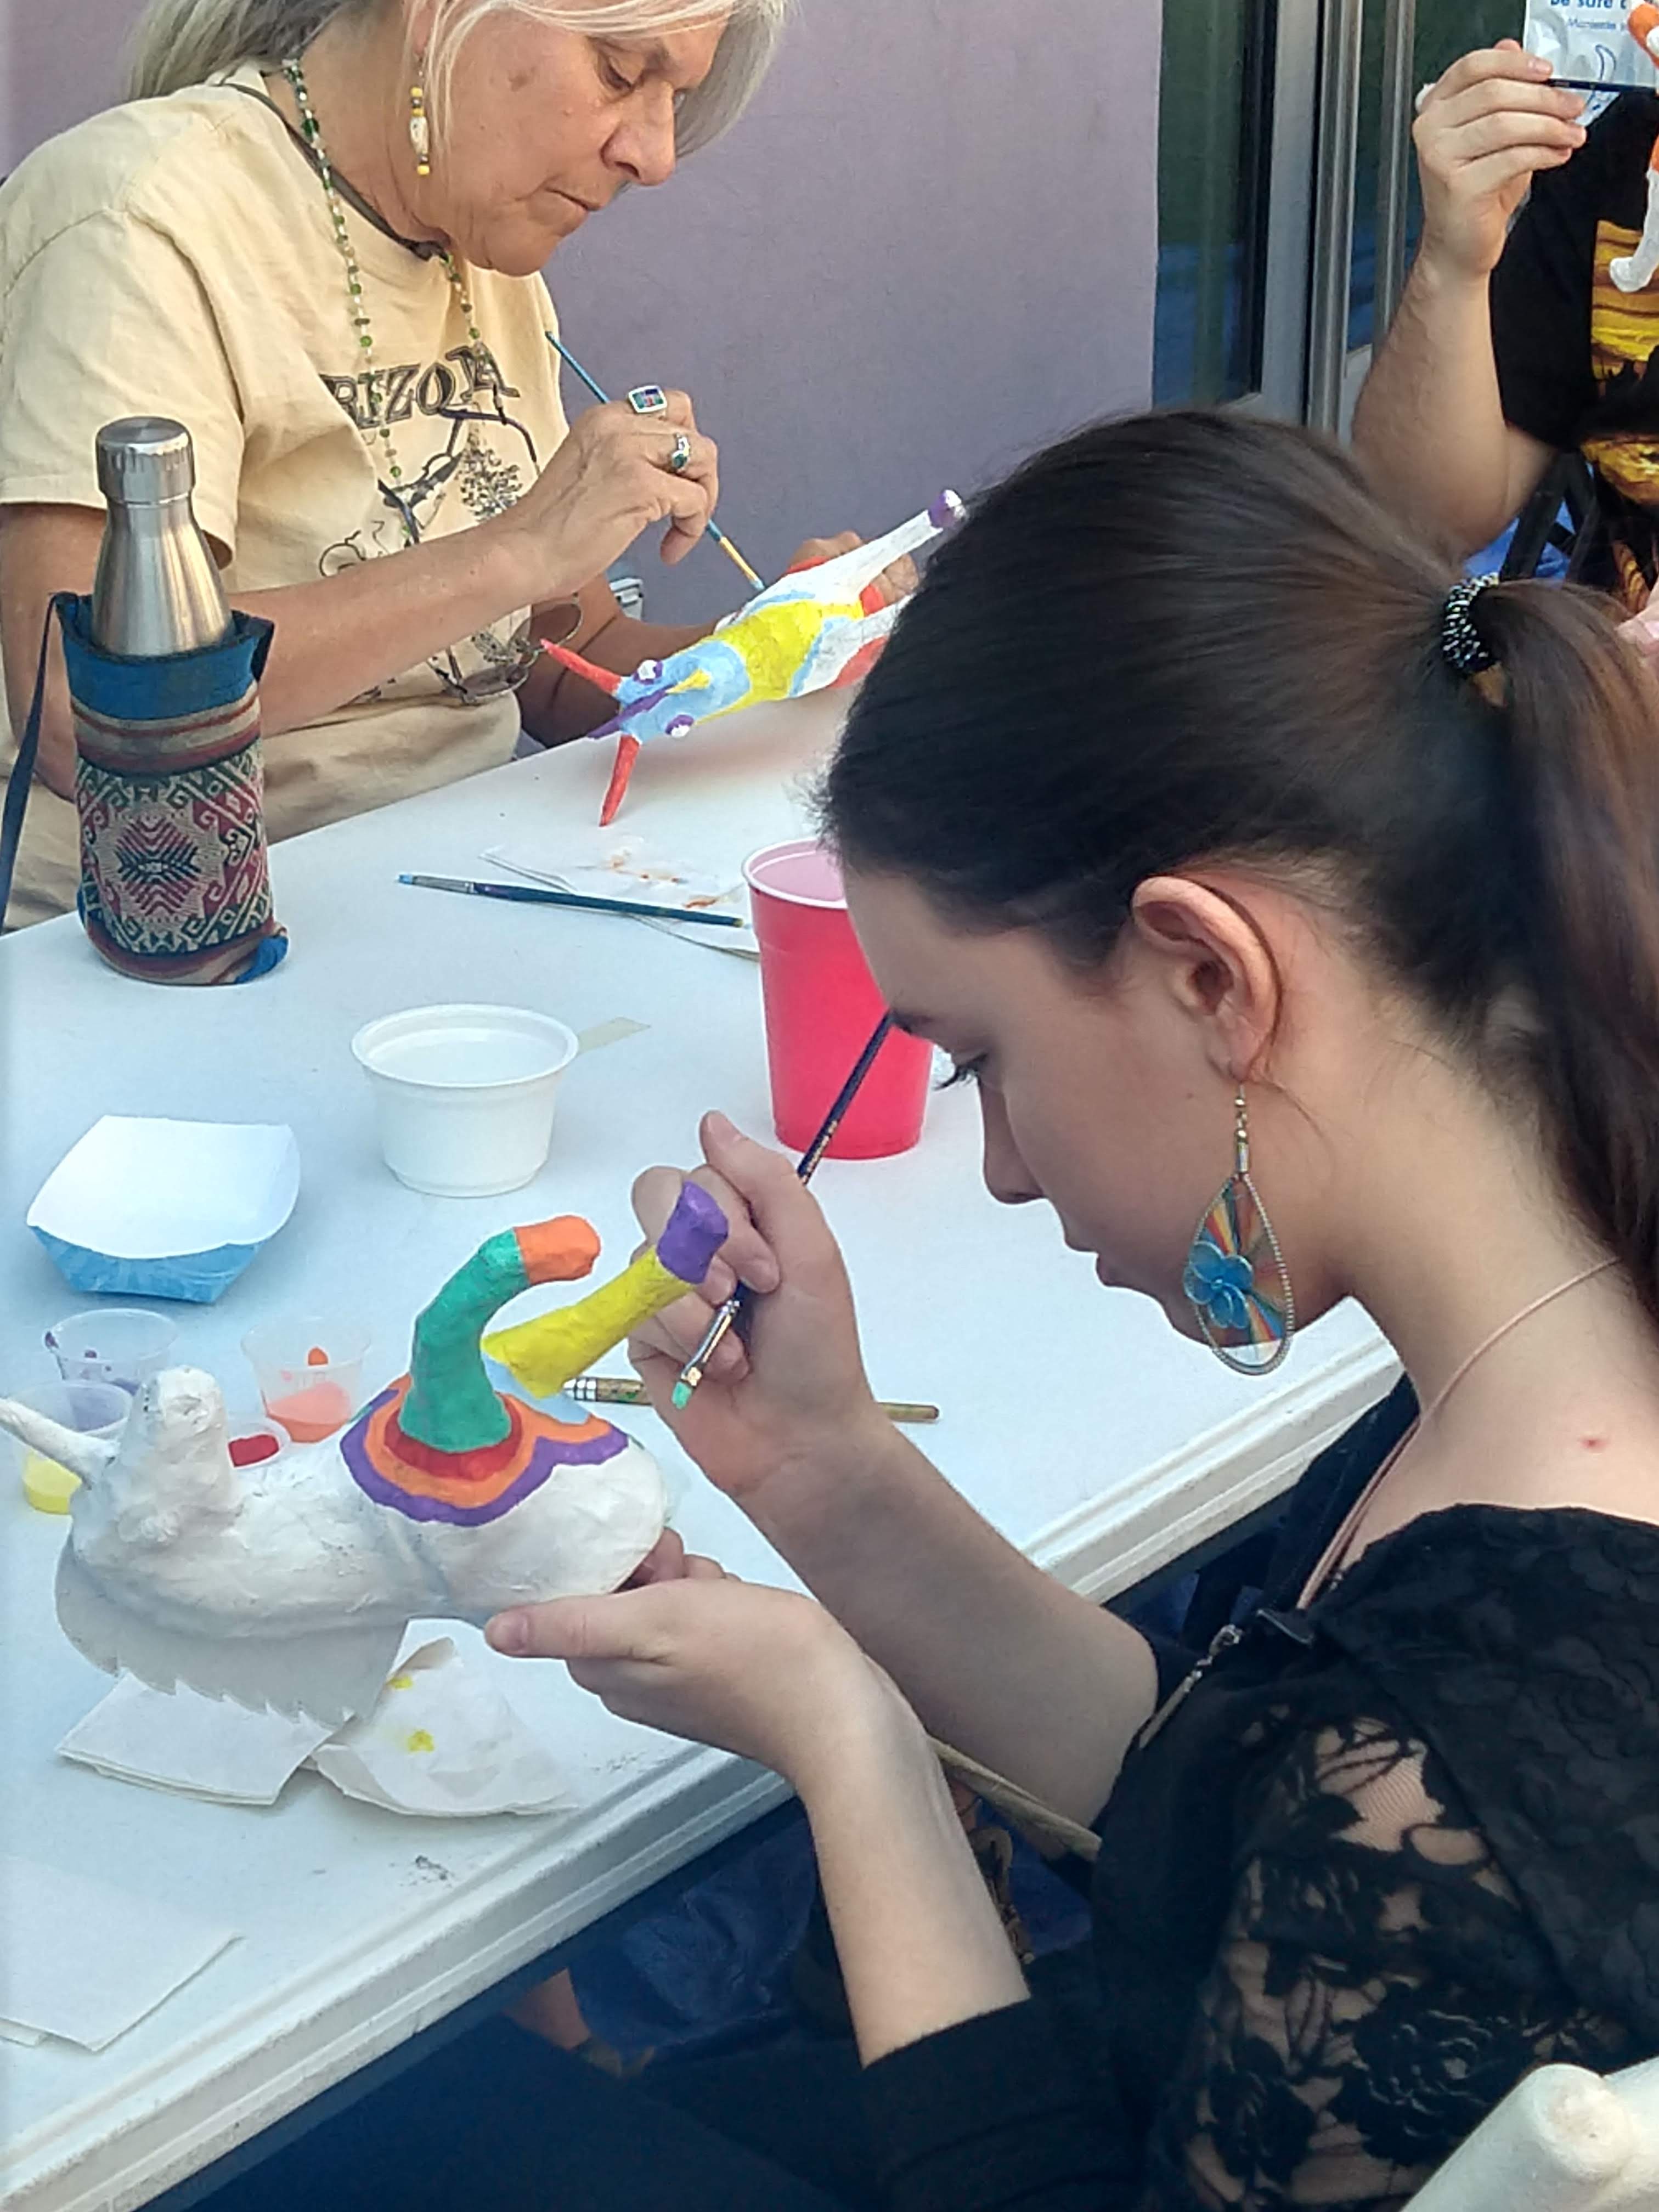 Two women, different ages, painting small alebrijes sculptures.